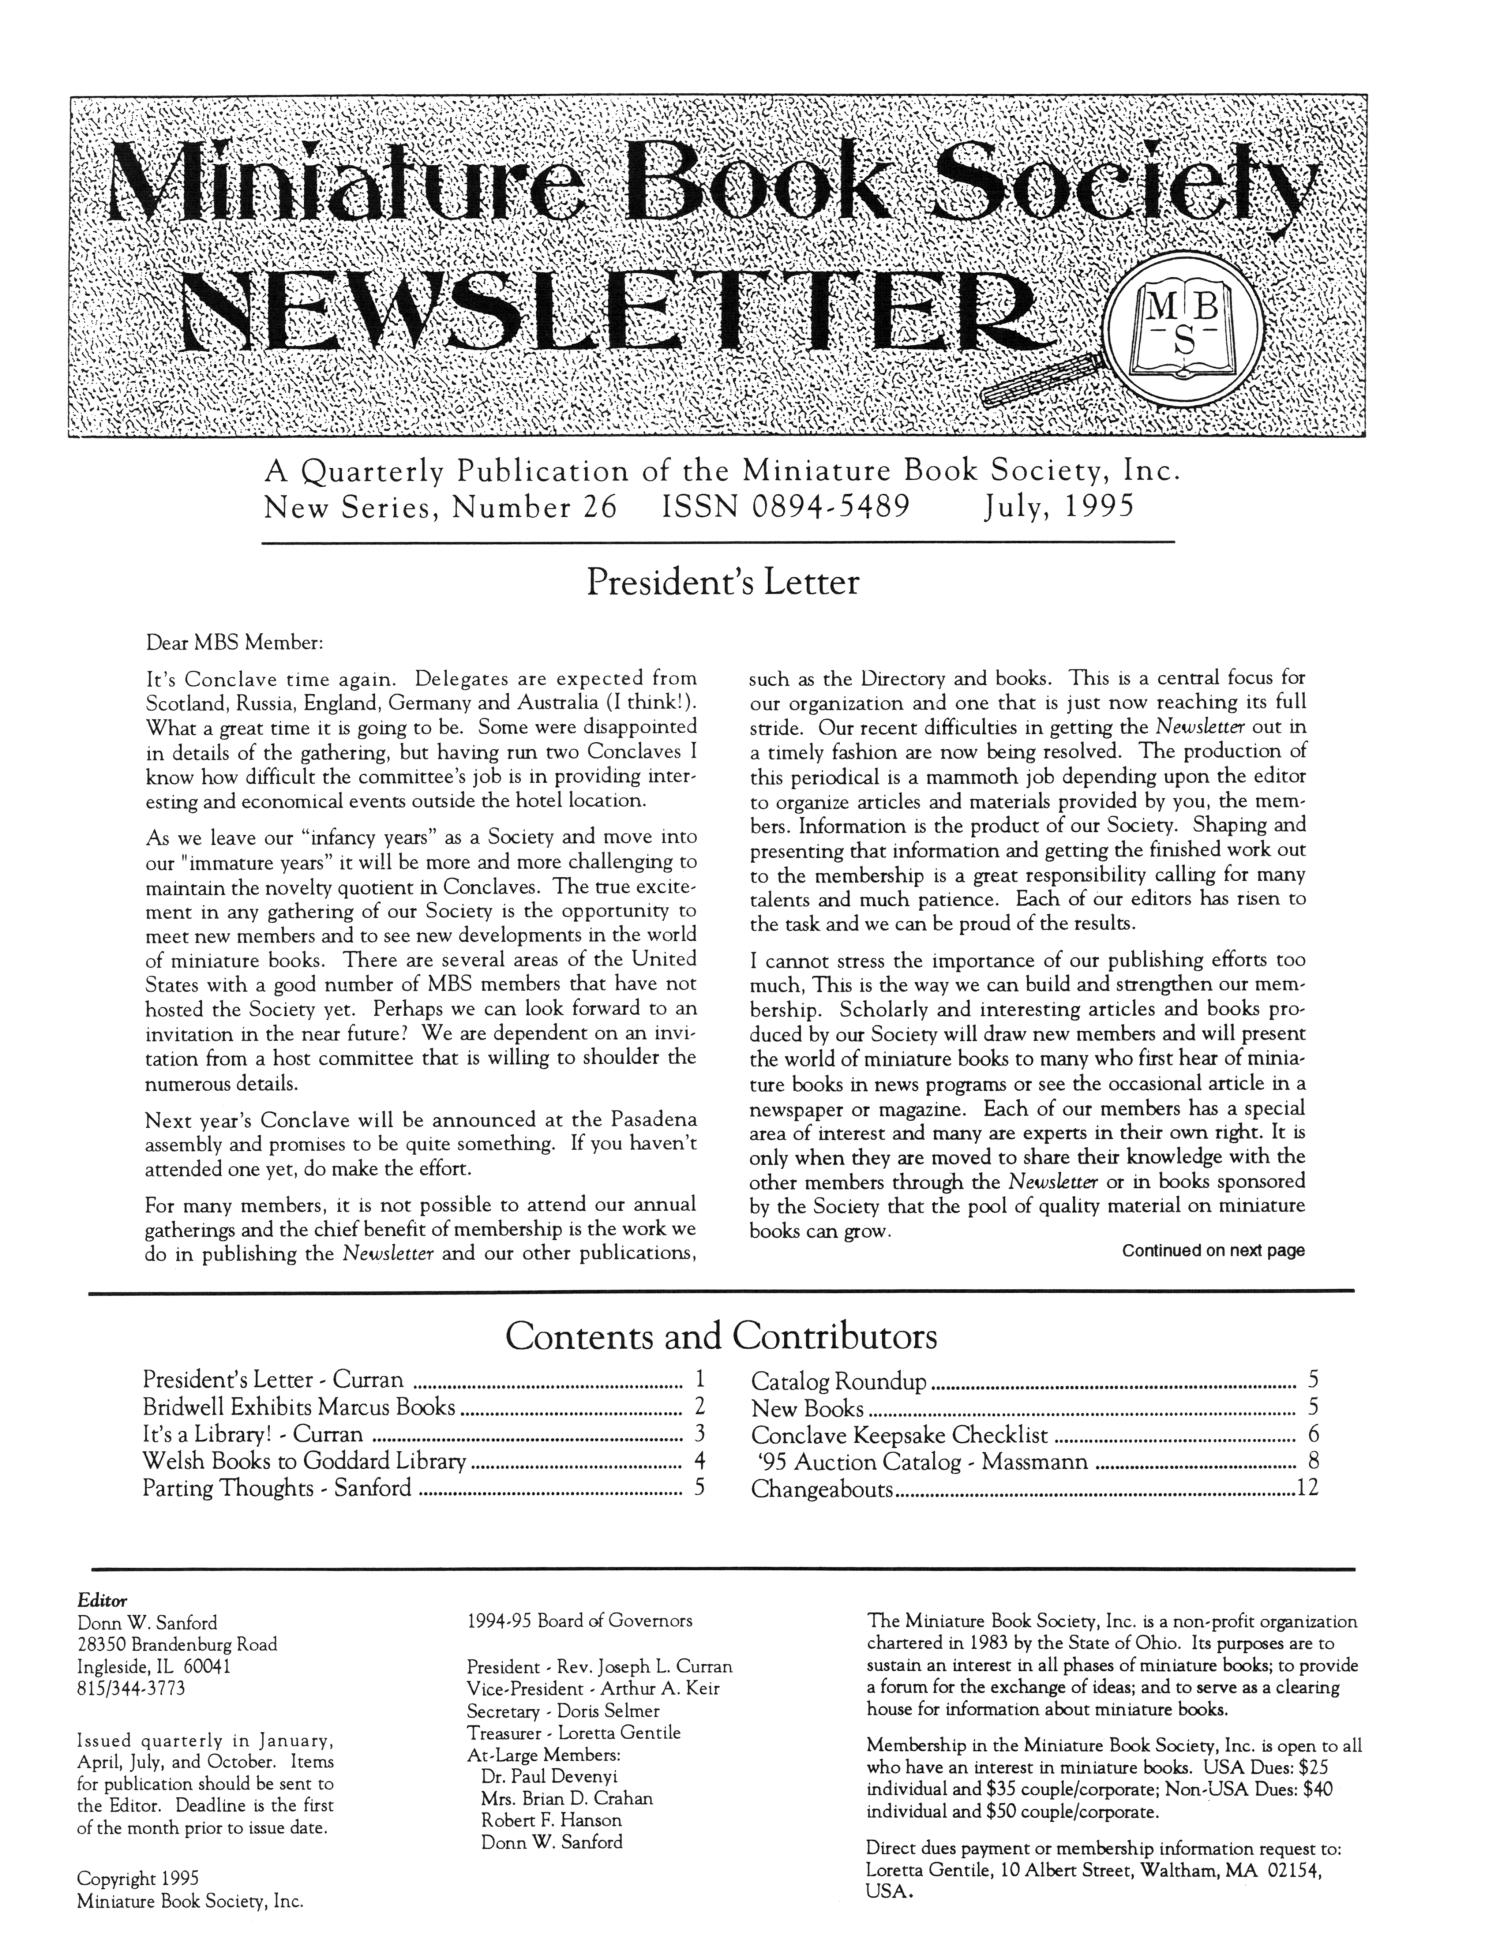 Miniature Book Society Newsletter, Number 26, July 1995
                                                
                                                    1
                                                